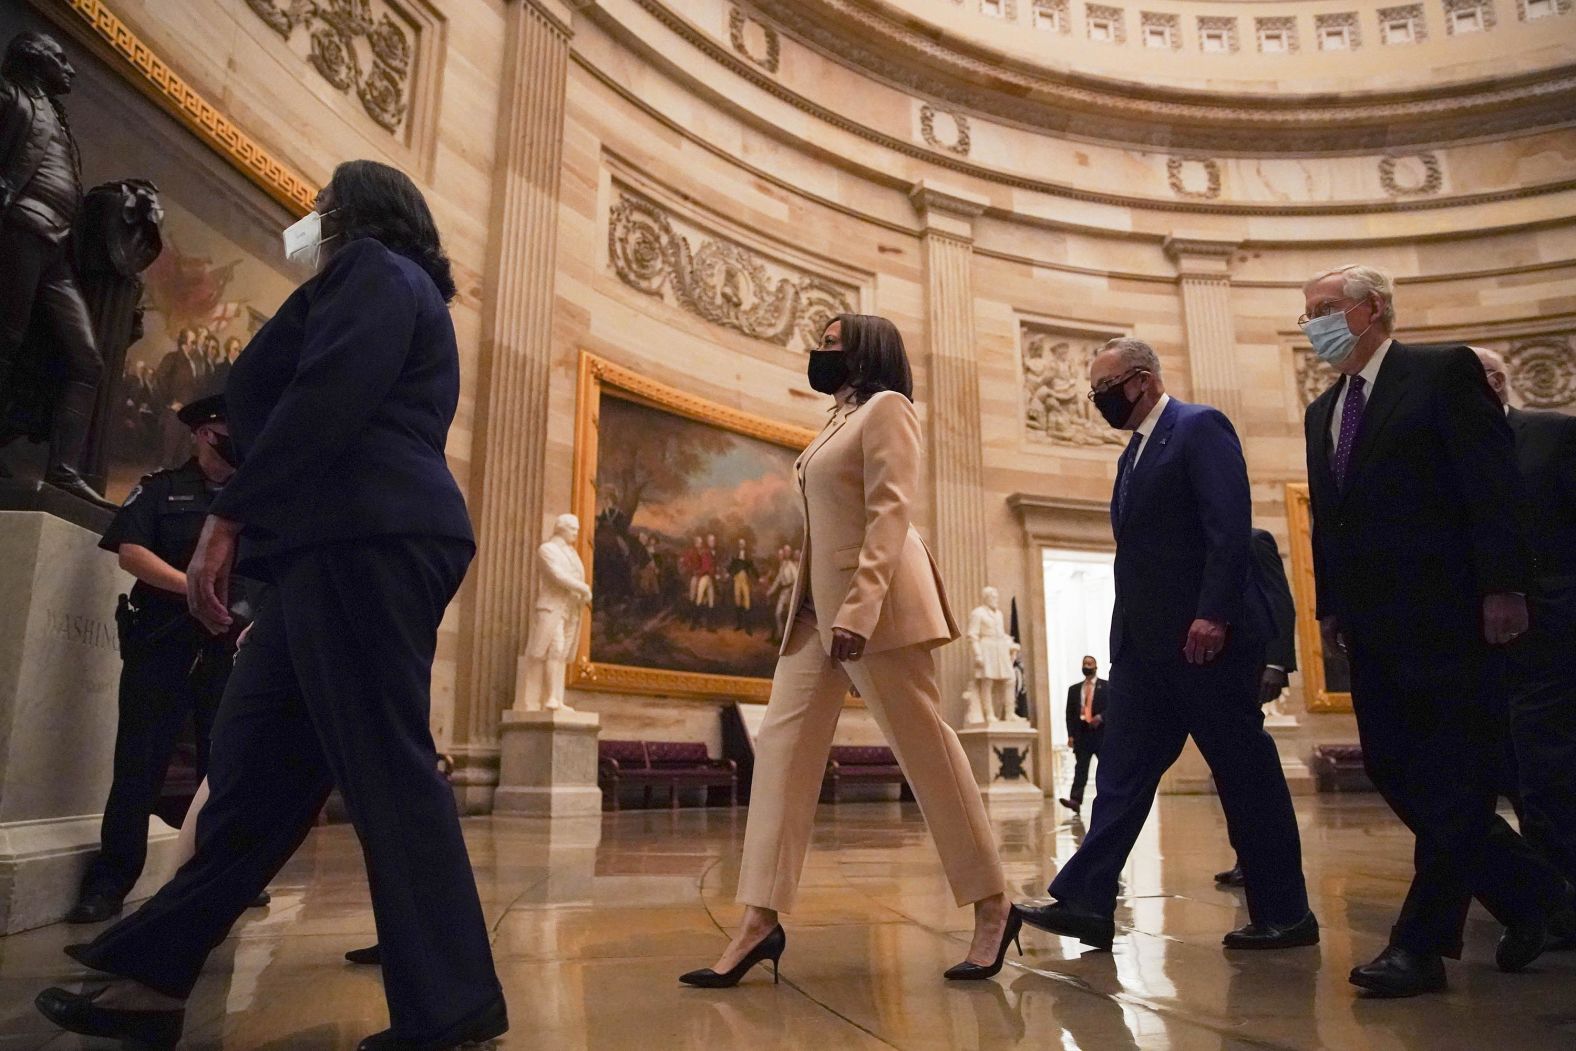 Harris is trailed by Senate Minority Leader Chuck Schumer and Senate Minority Leader Mitch McConnell as they walk through the Capitol Rotunda before the speech.